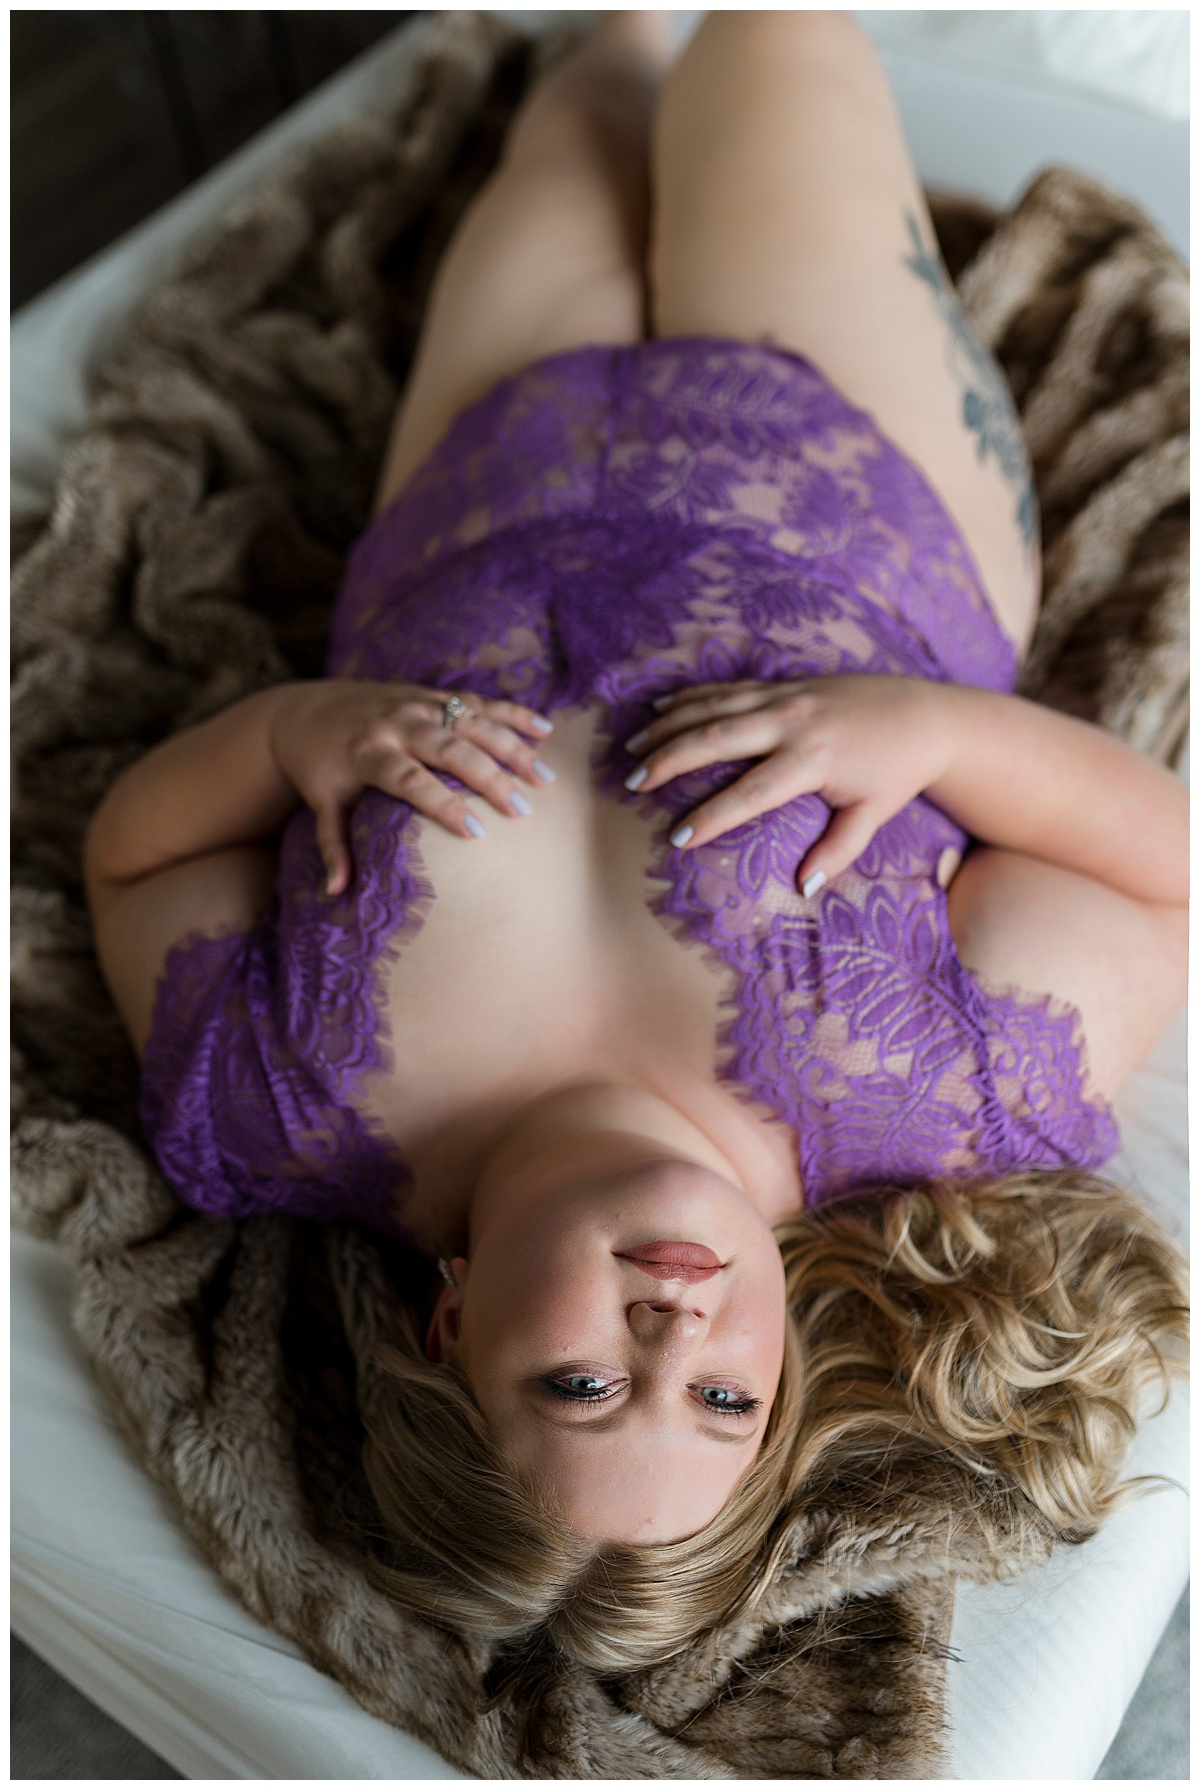 where to buy lingerie like purple set worn on the bed